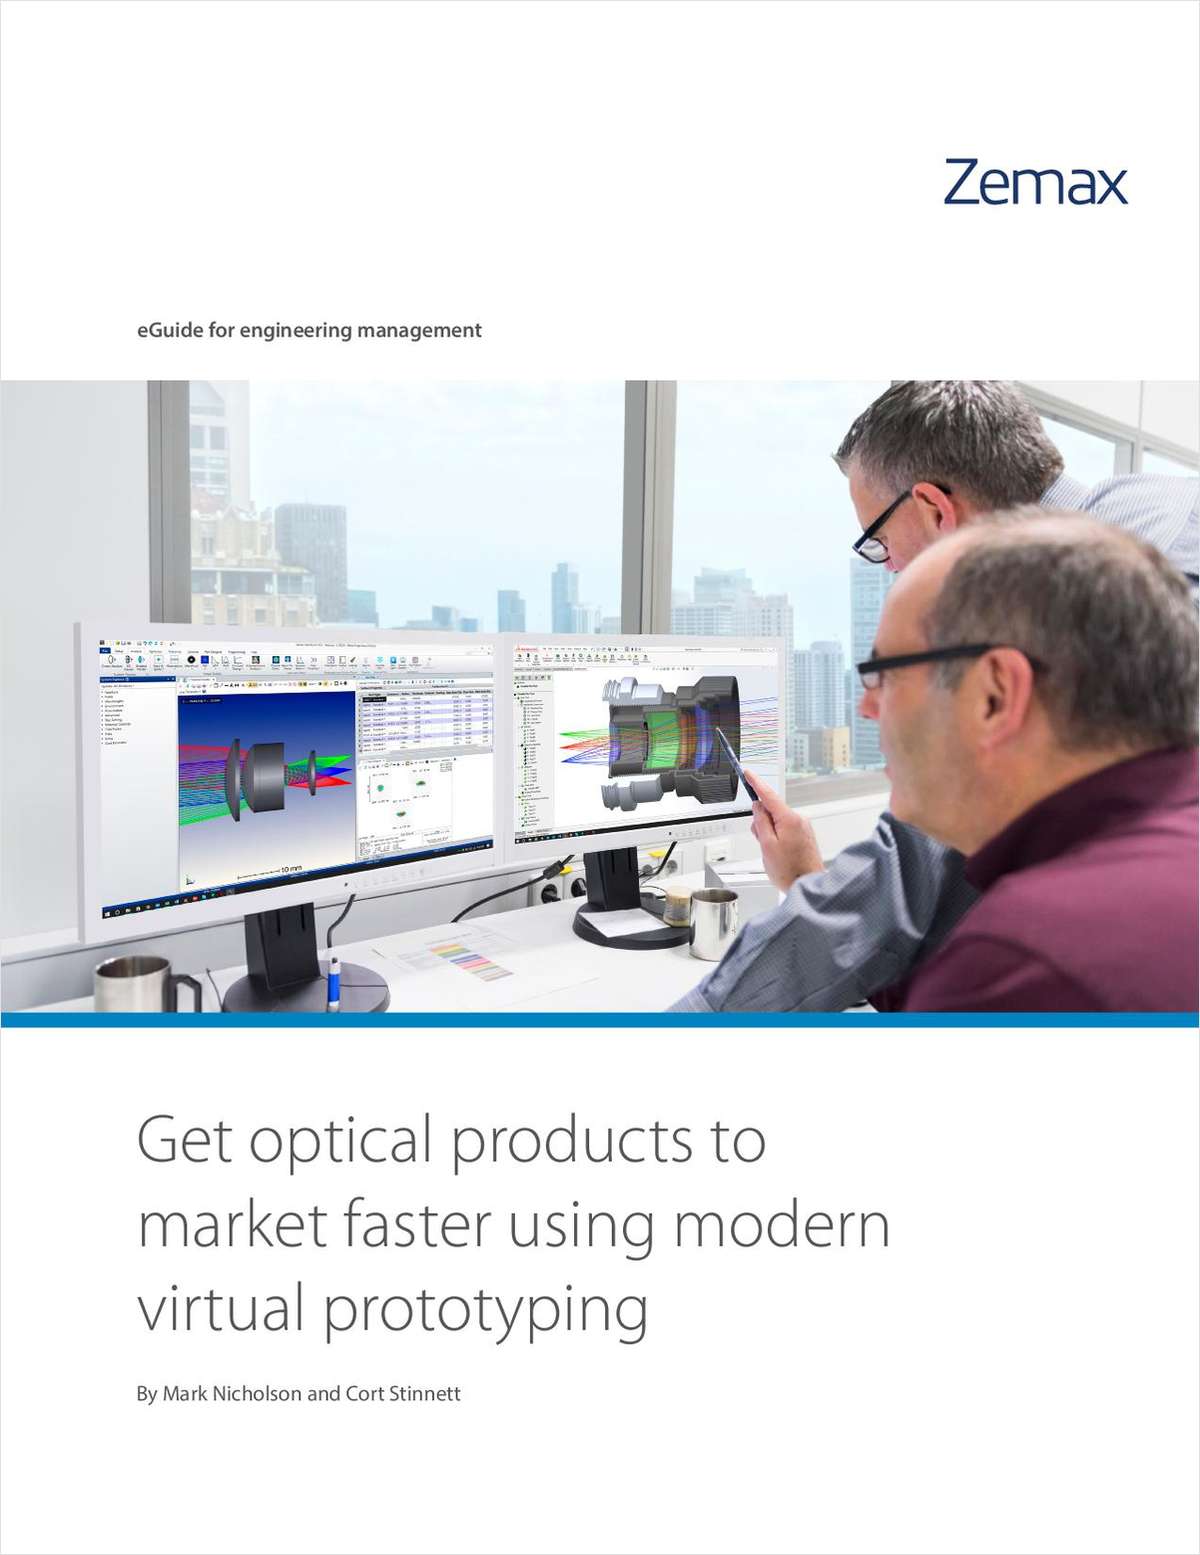 Get Optical Products to Market Faster Using Modern Virtual Prototyping